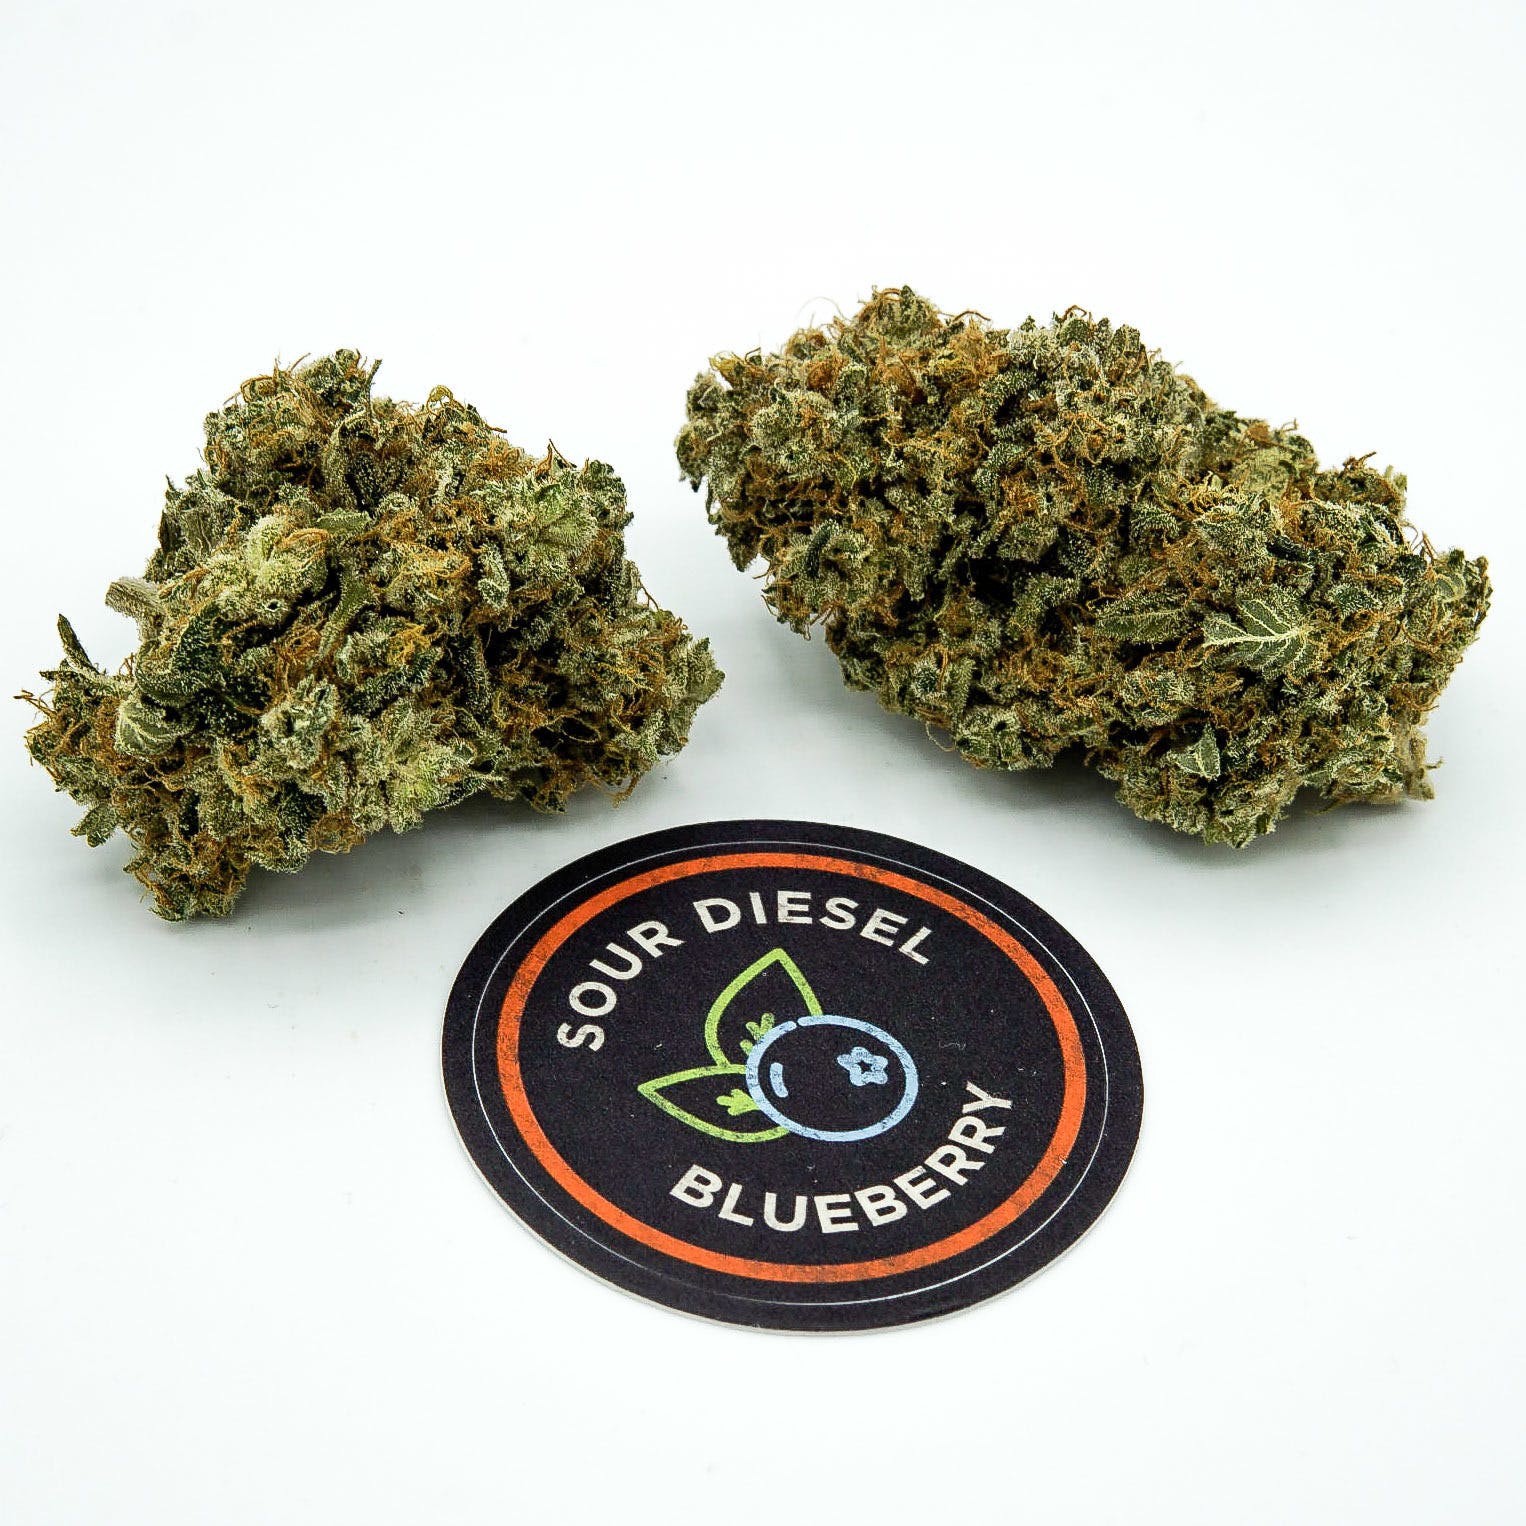 Sour Diesel Blueberry by JAR Cannabis Co.